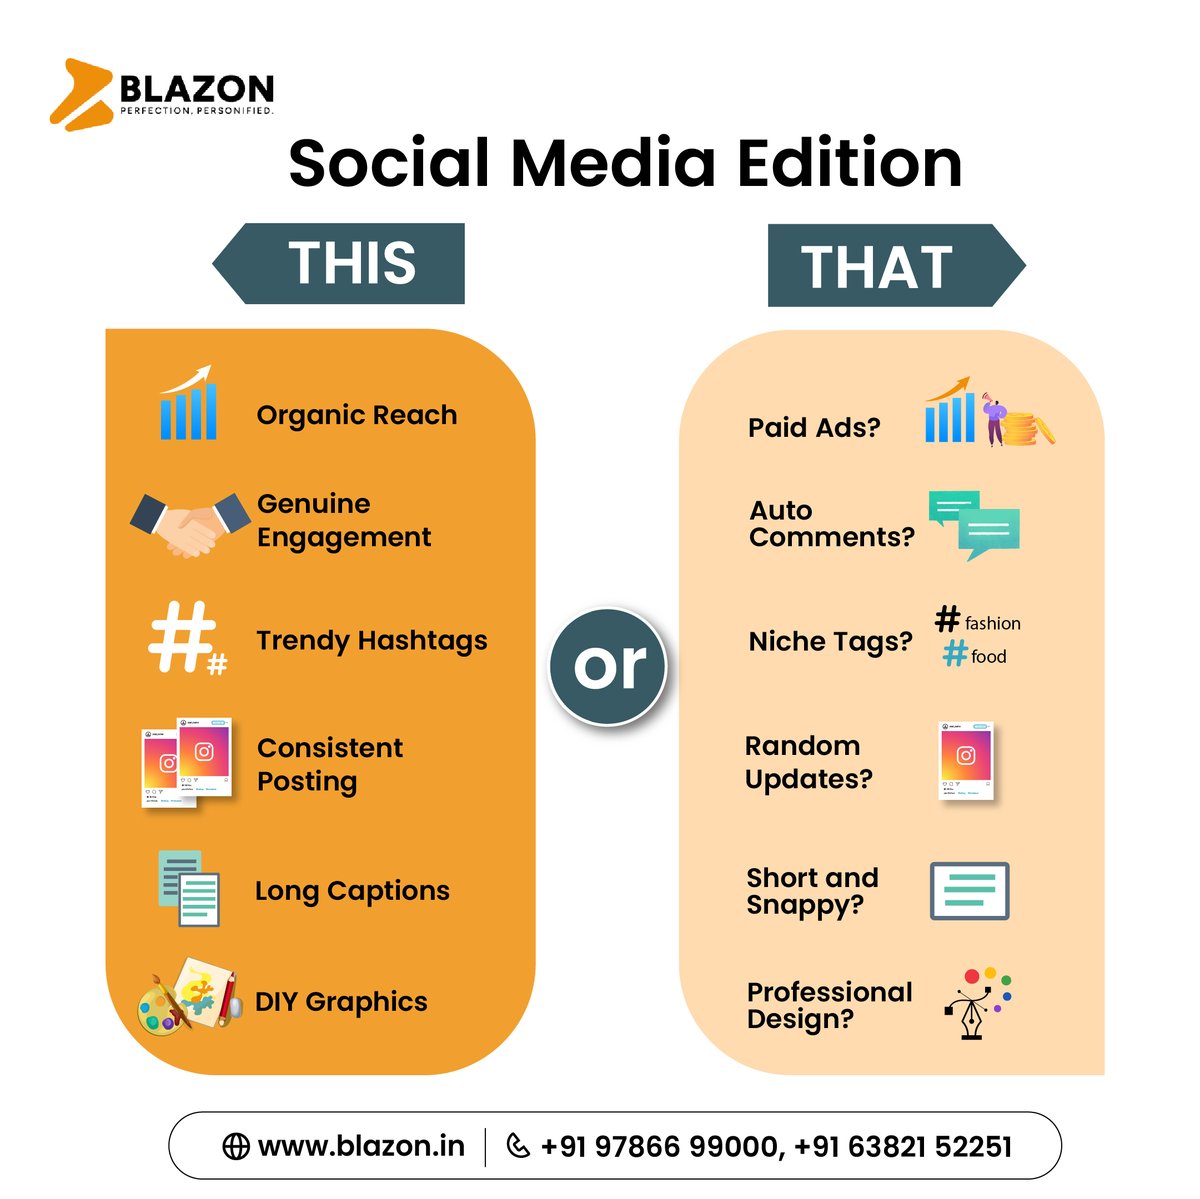 Tell us your social media style! 📅🎲🤔📱

Visit us 🔗 blazon.in
.
.
.
#blazon #blazoncorp #socialmedia #socialmediamarketing #digitalmarketing #digitalmarketingagency #digitalmarketingexpert #thisorthat #thisorthatchallenge #thisorthattuesday  #socialmediastrategy